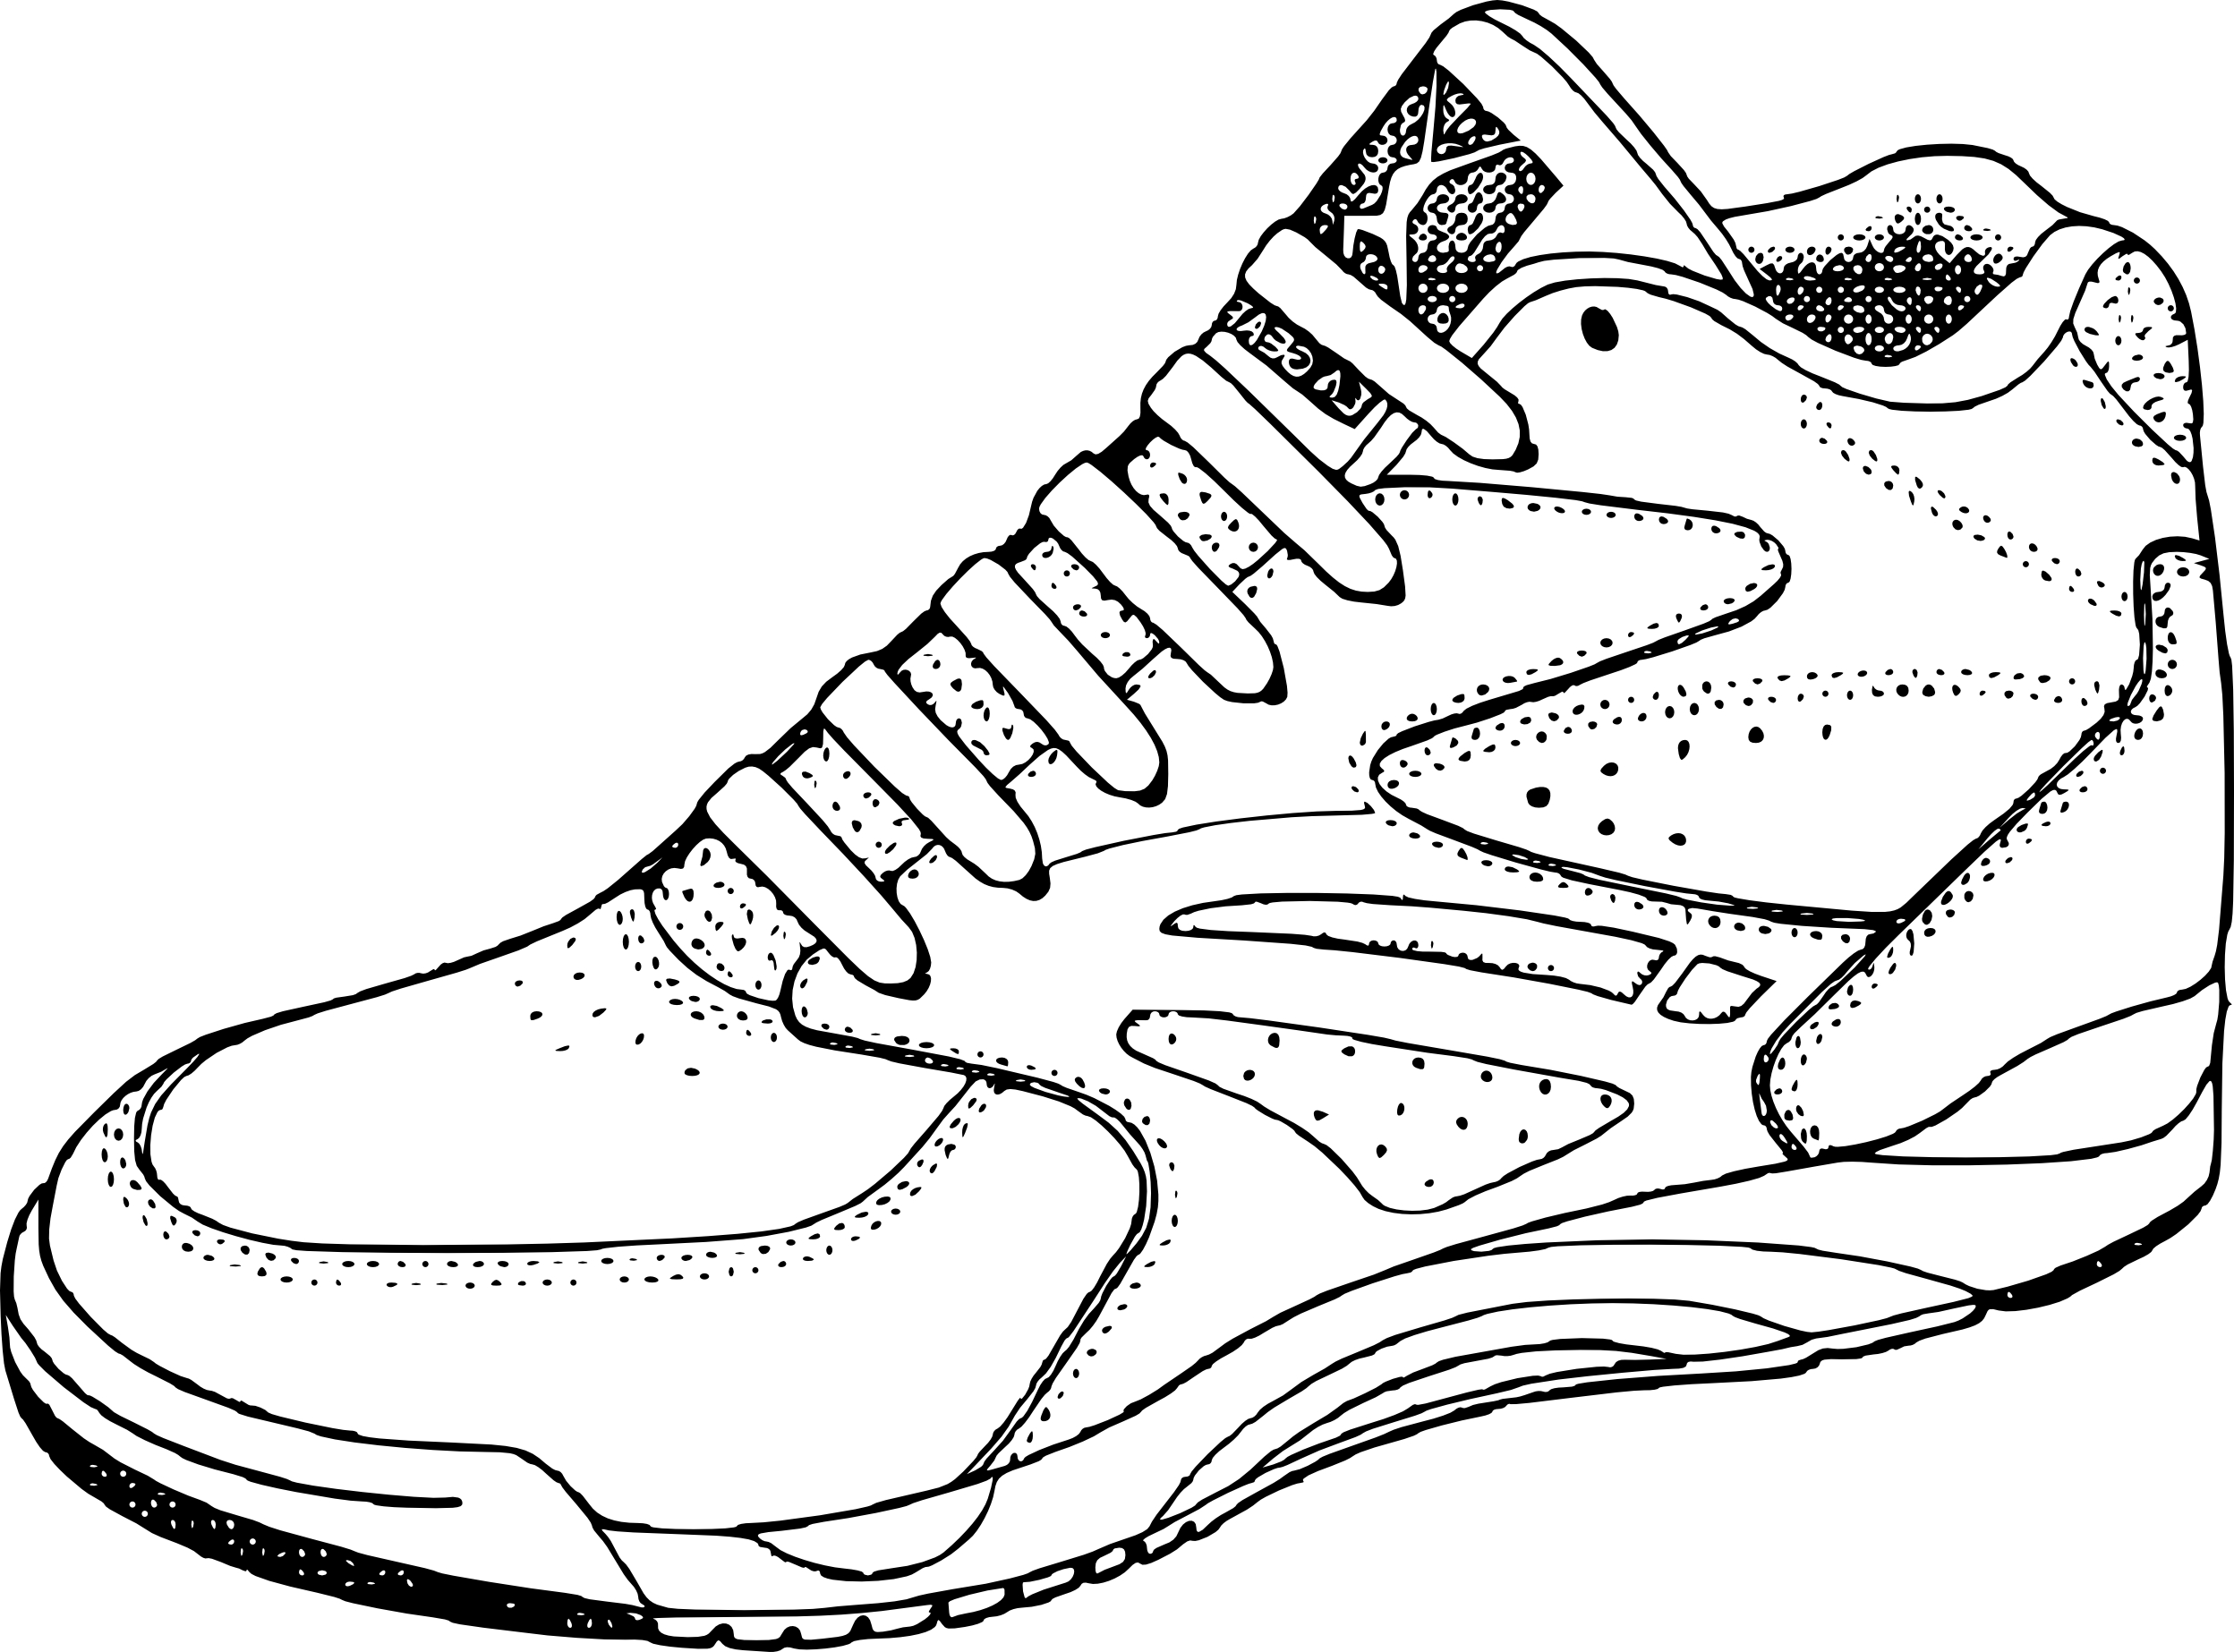 Basketball Shoe coloring page 2